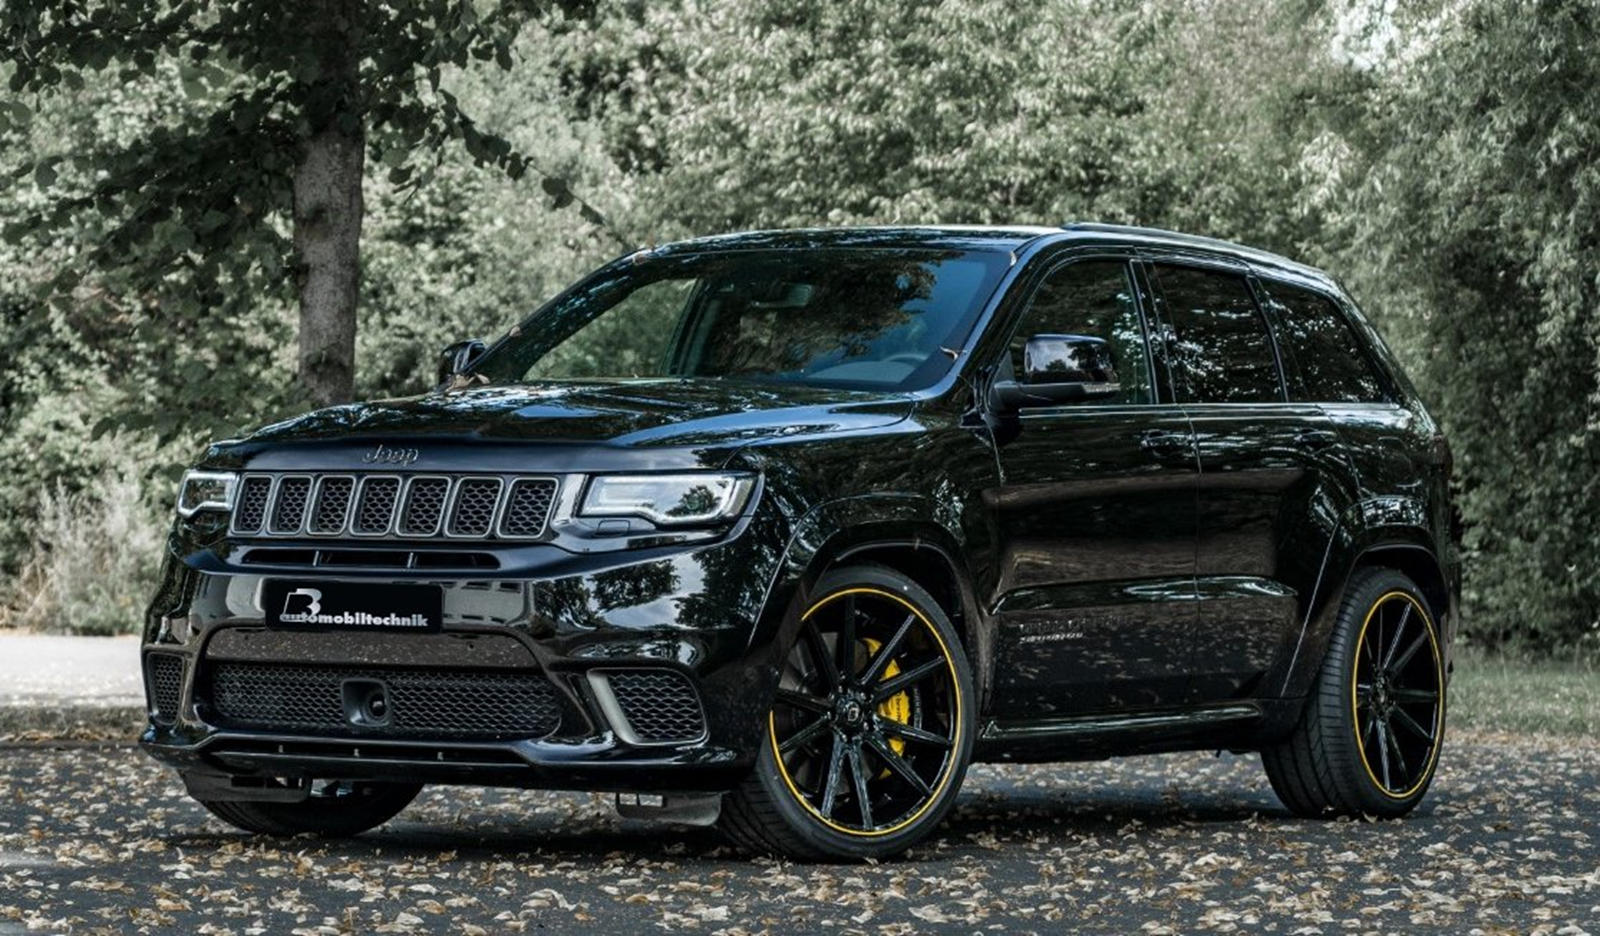 Tuned Jeep Trackhawk Hits 100 km/h in 3.4 Seconds